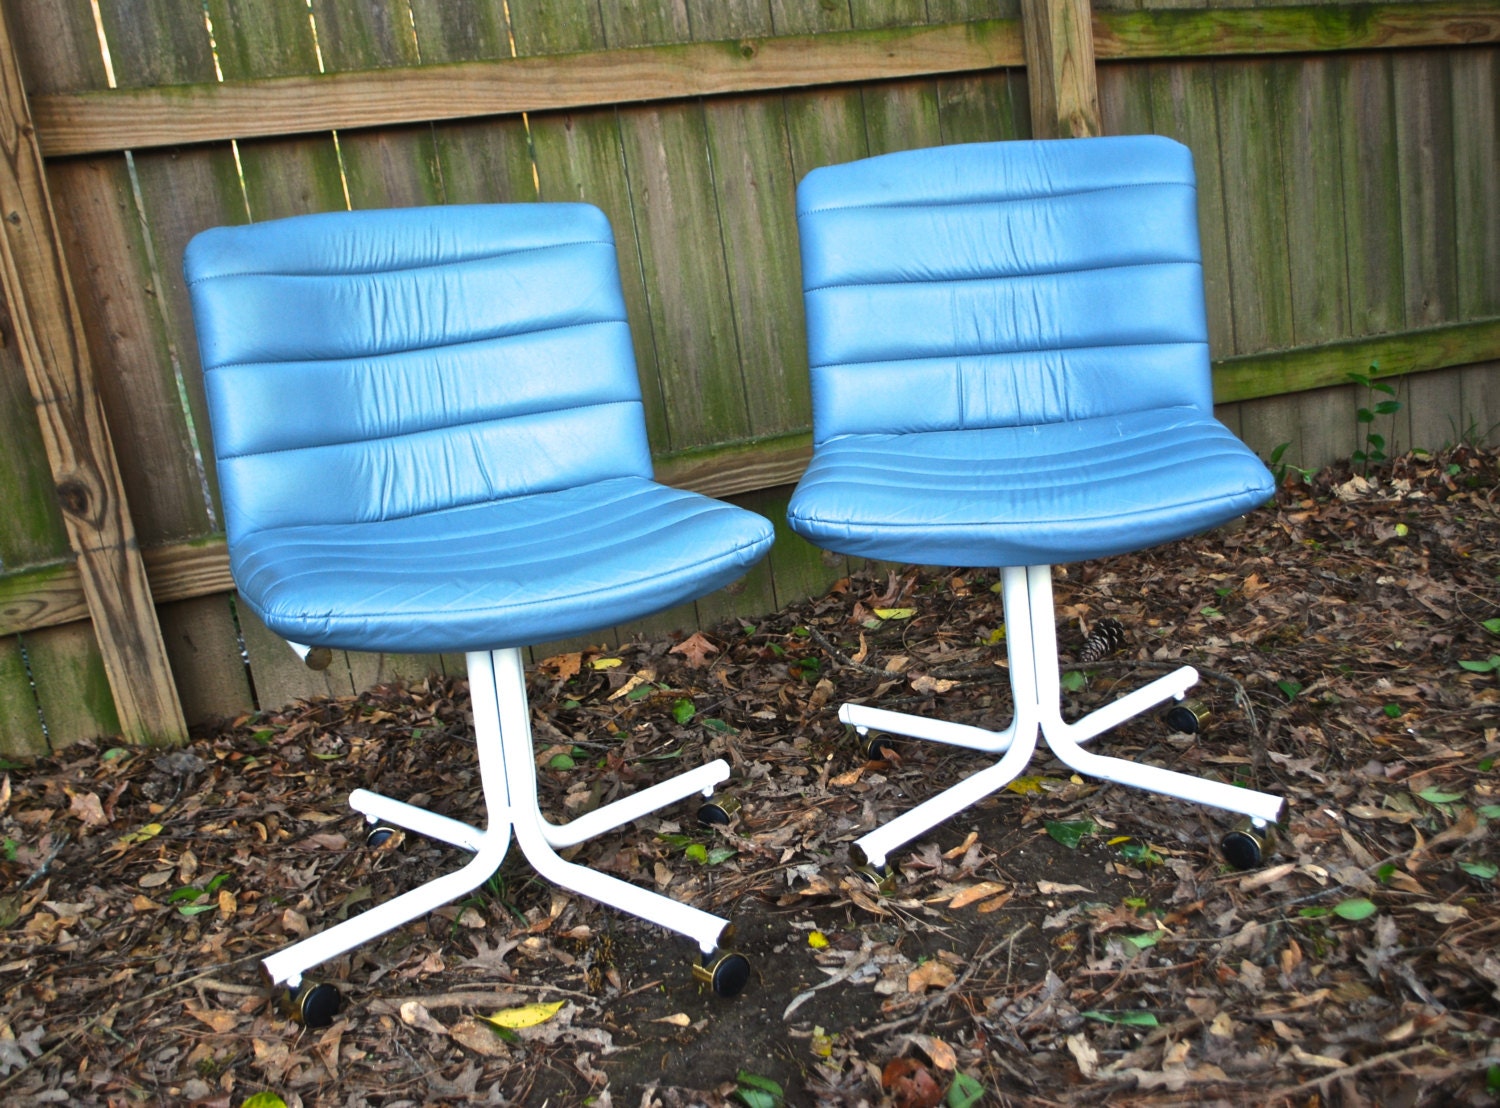 Popular items for office chair on Etsy